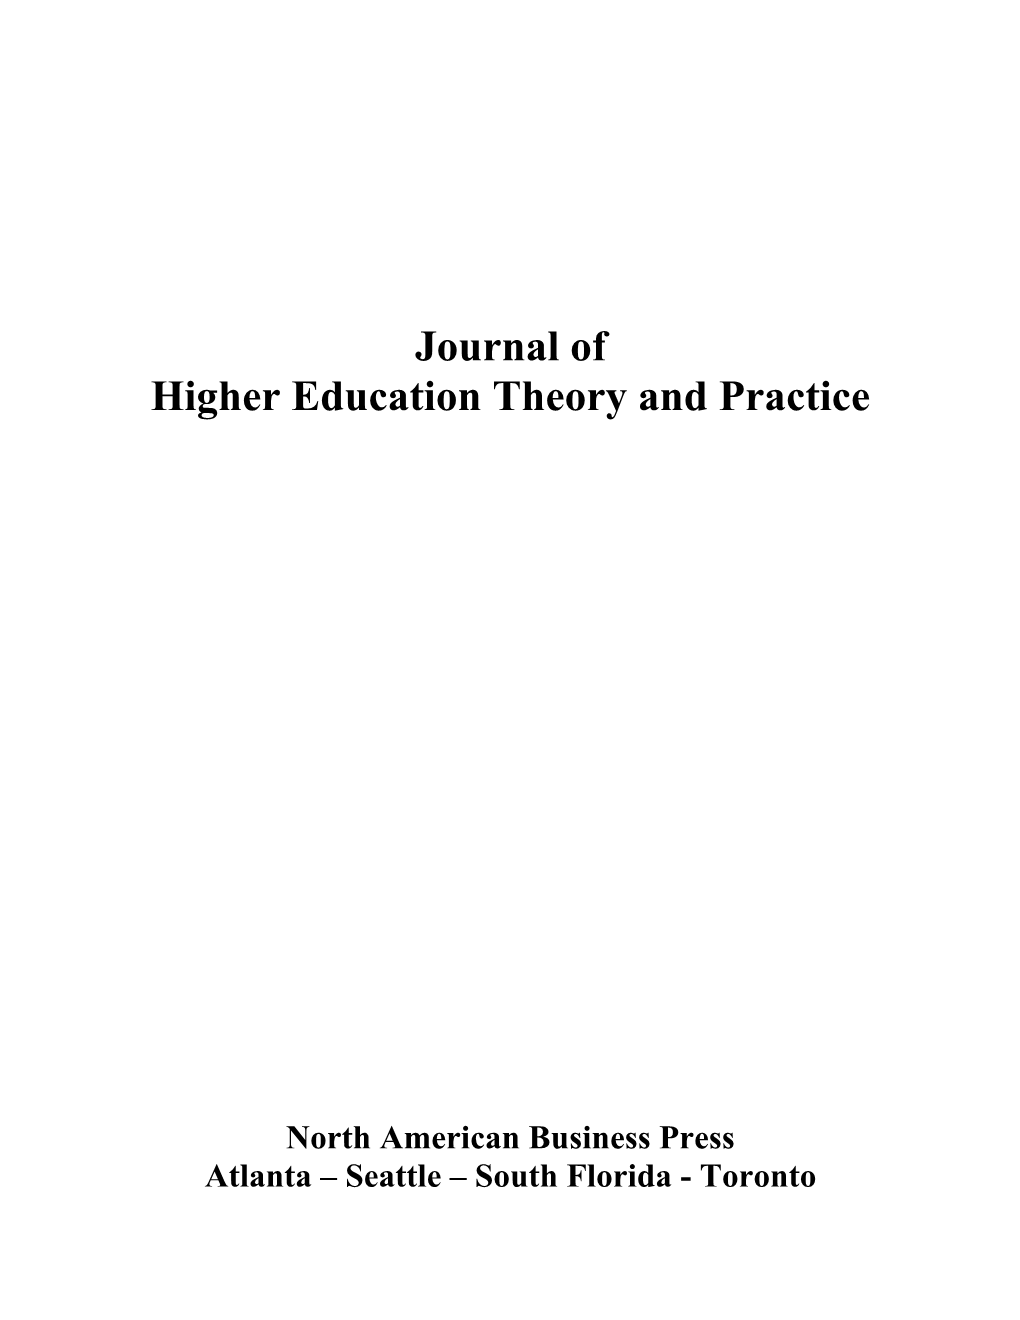 Journal of Higher Education Theory and Practice